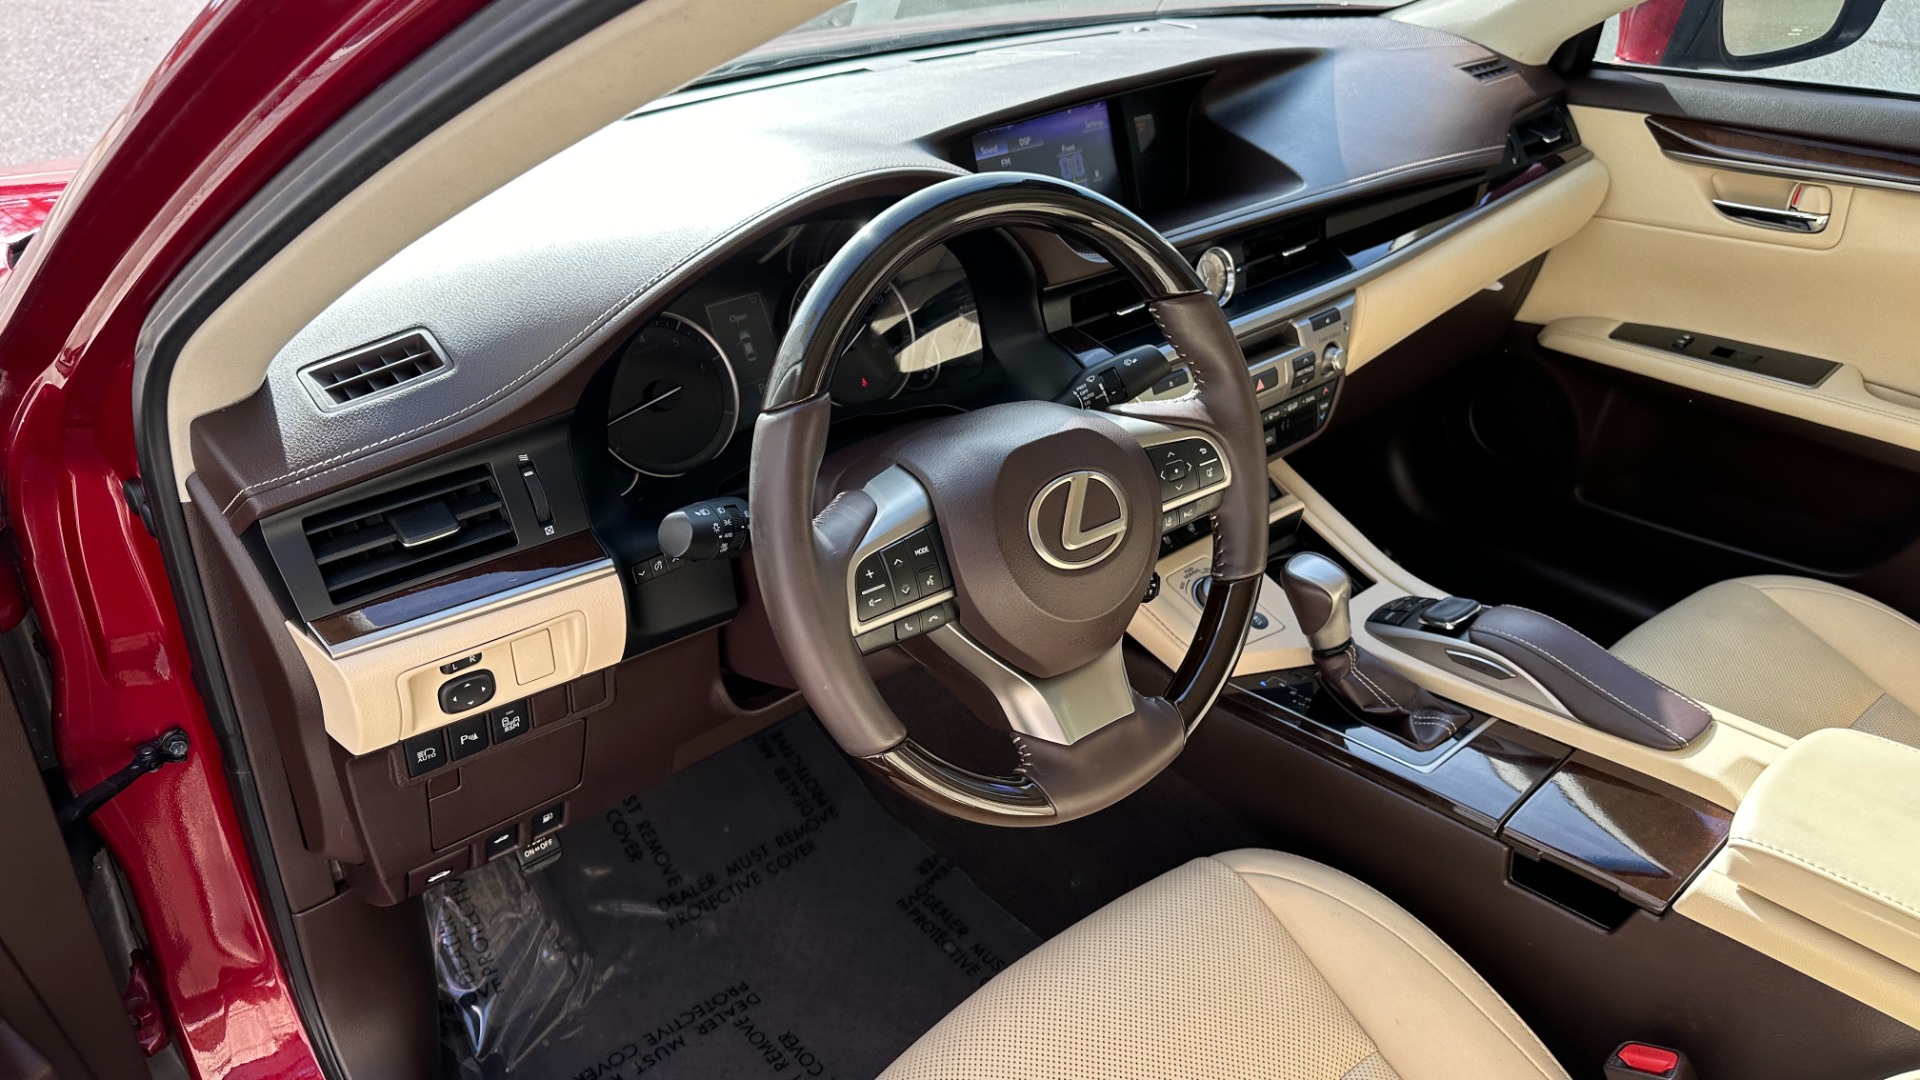 Used 2018 Lexus ES ES 350 / LUXURY PKG / PANORAMIC ROOF / NAV PACKAGE / LED LIGHTS for sale $24,595 at Formula Imports in Charlotte NC 28227 12